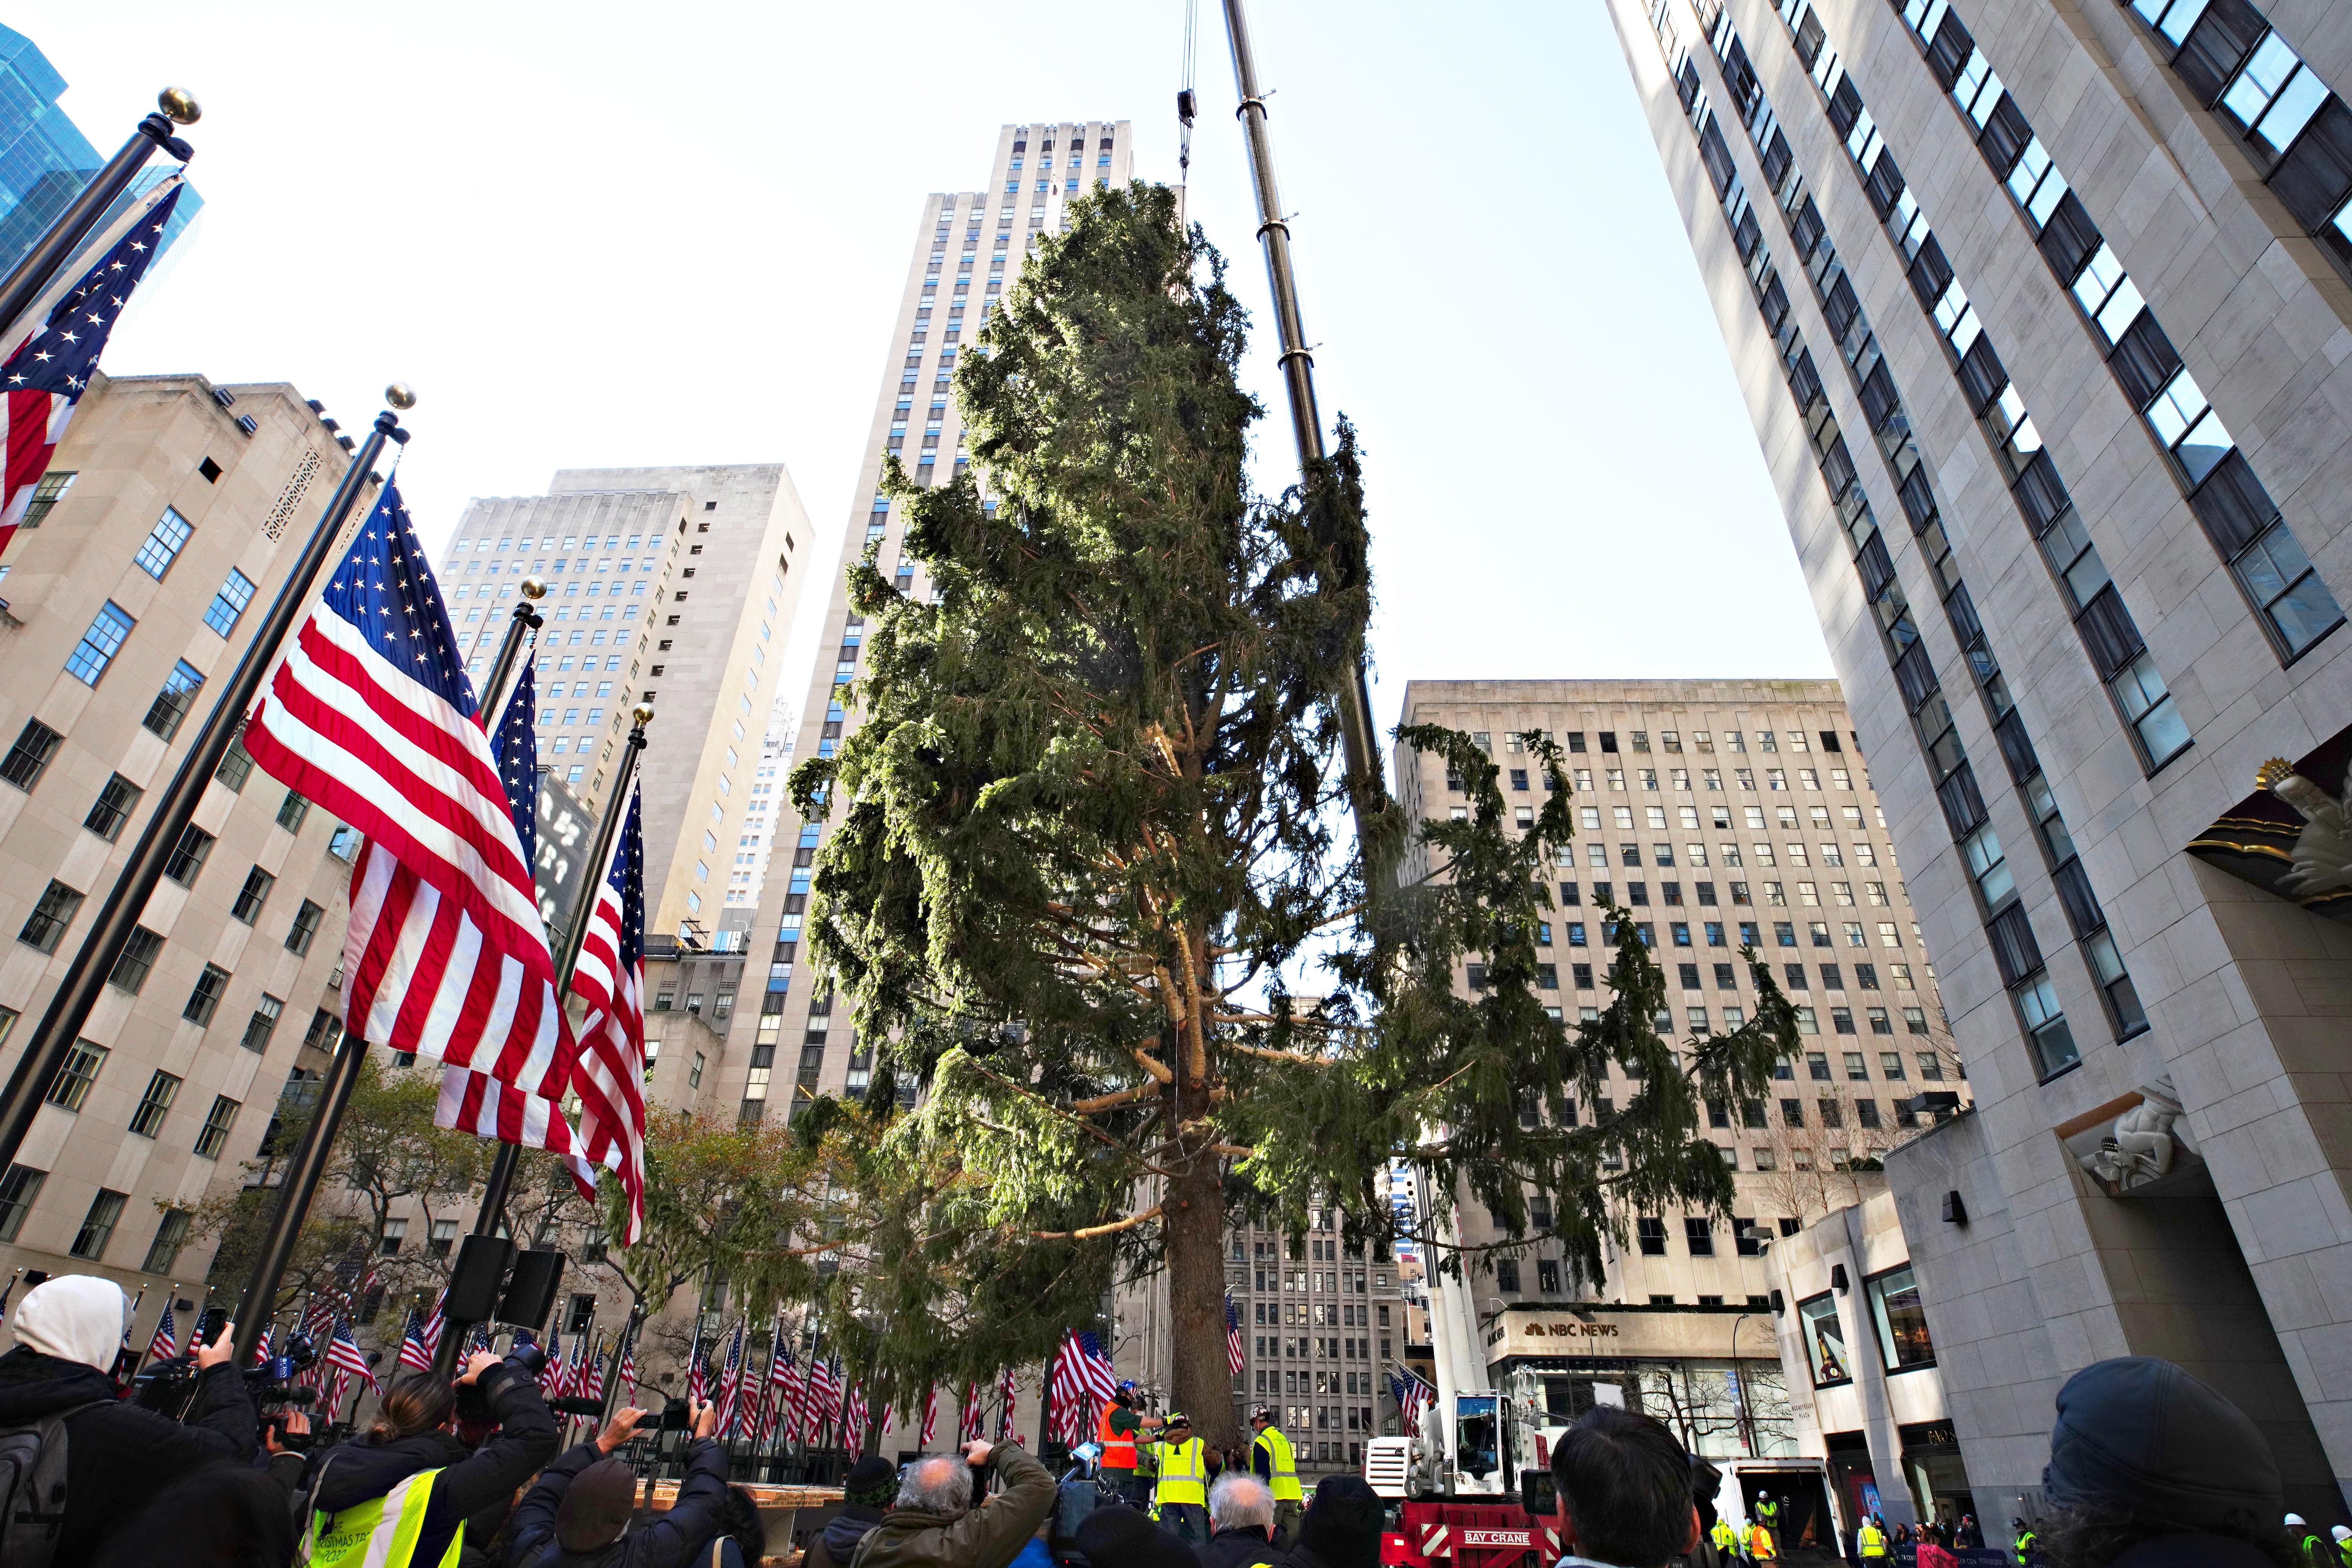 New York's Rockefeller Center Christmas Tree is causing hilarious reactions